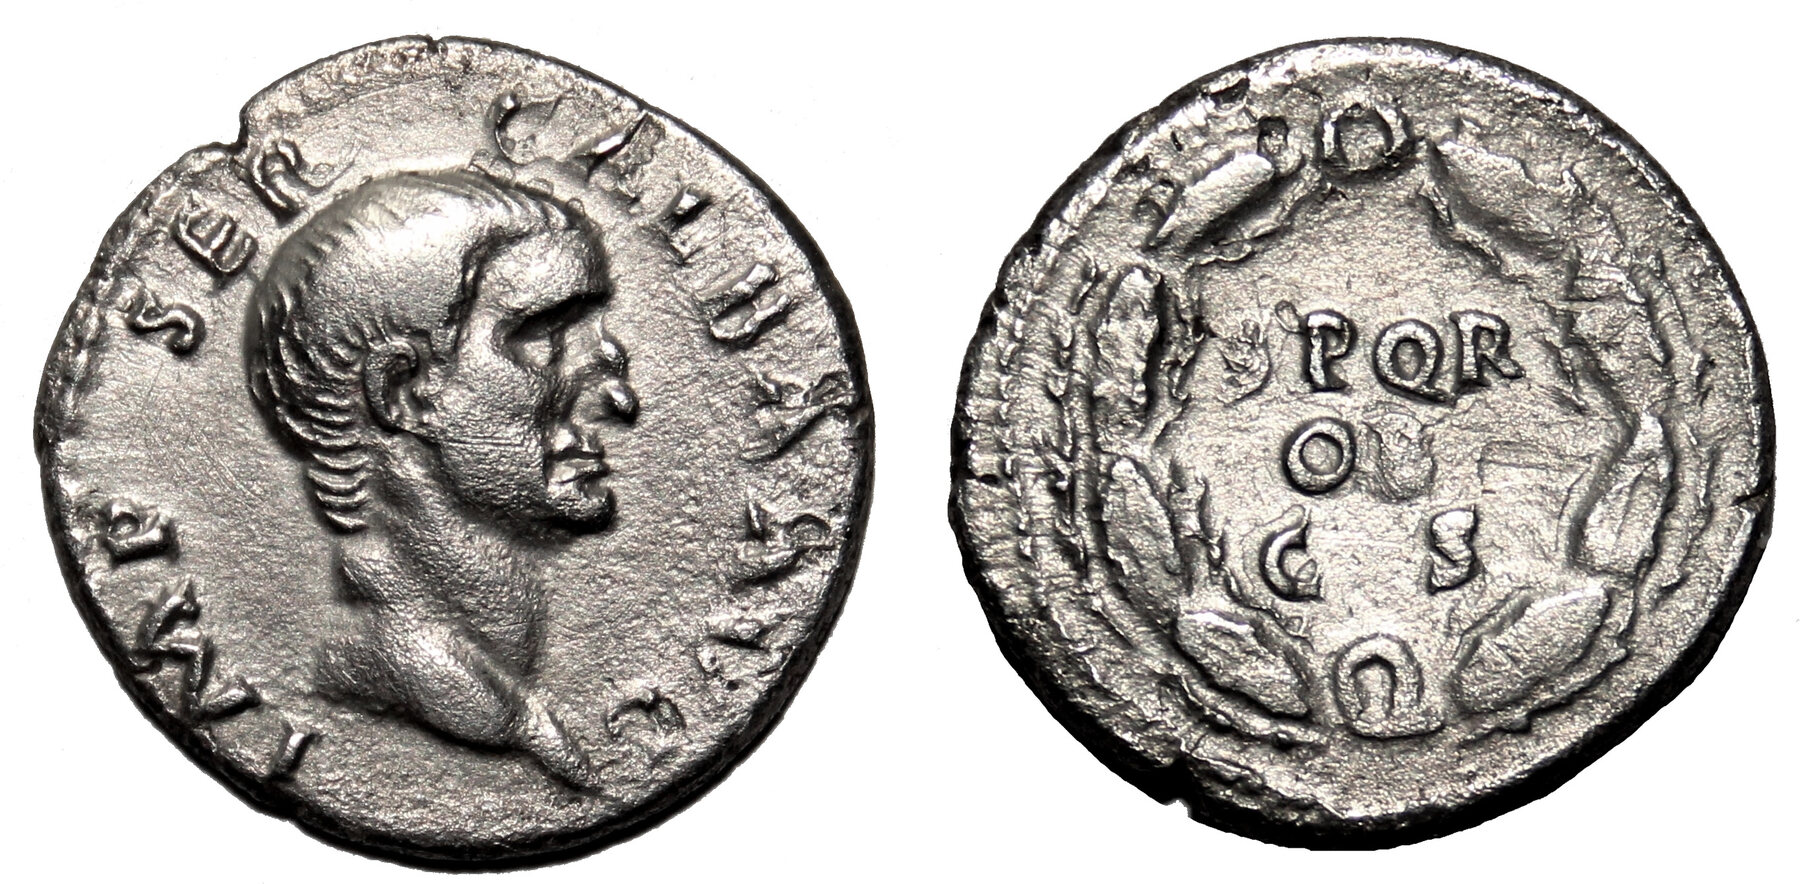 The ancient coin that topped $K at auction